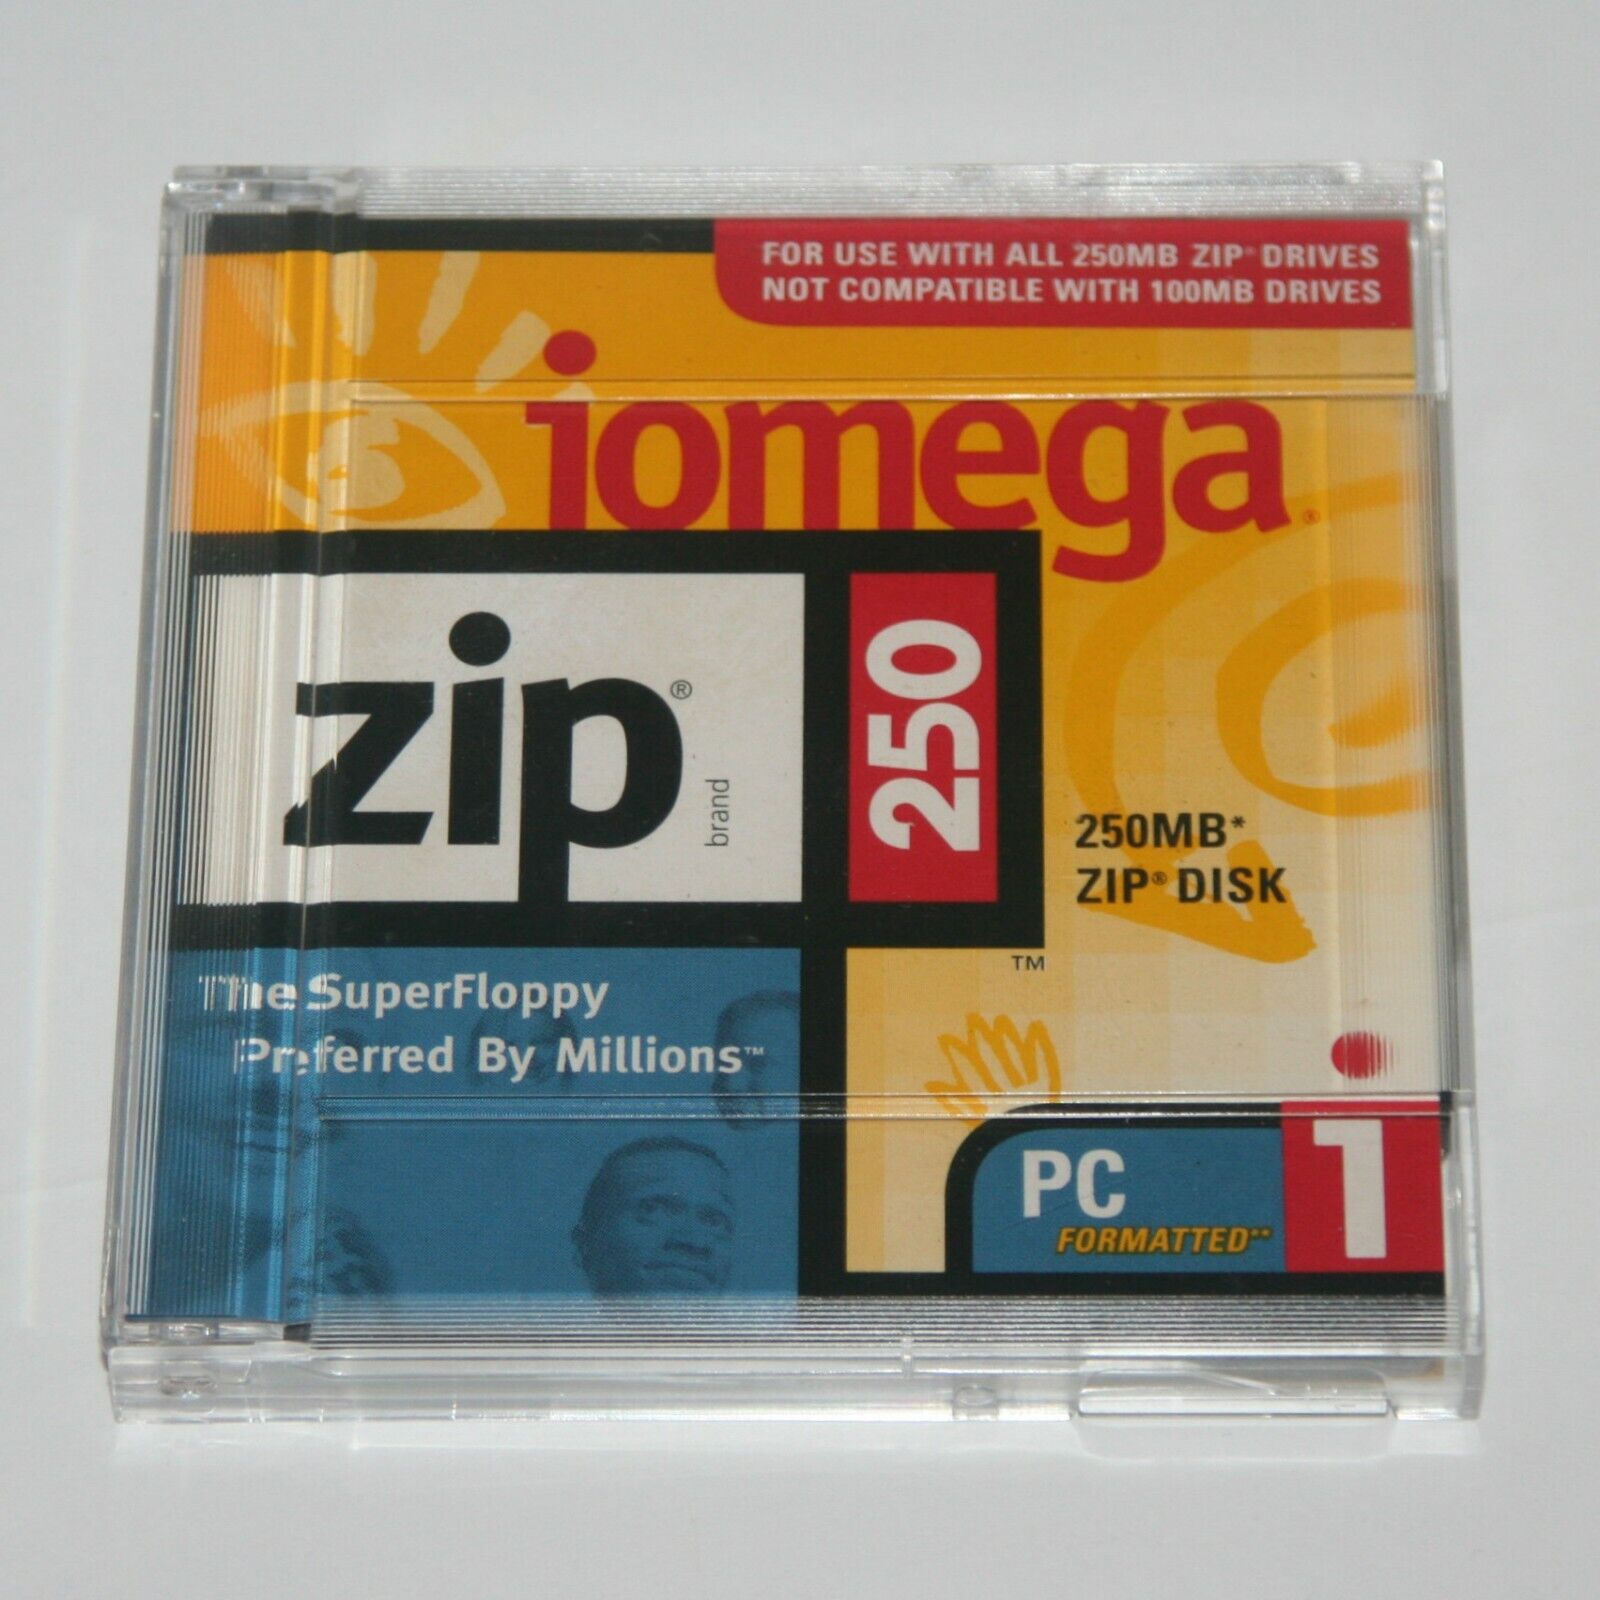 Iomega Zip Disk 250 MB PC Formatted Superfloppy - One Disk